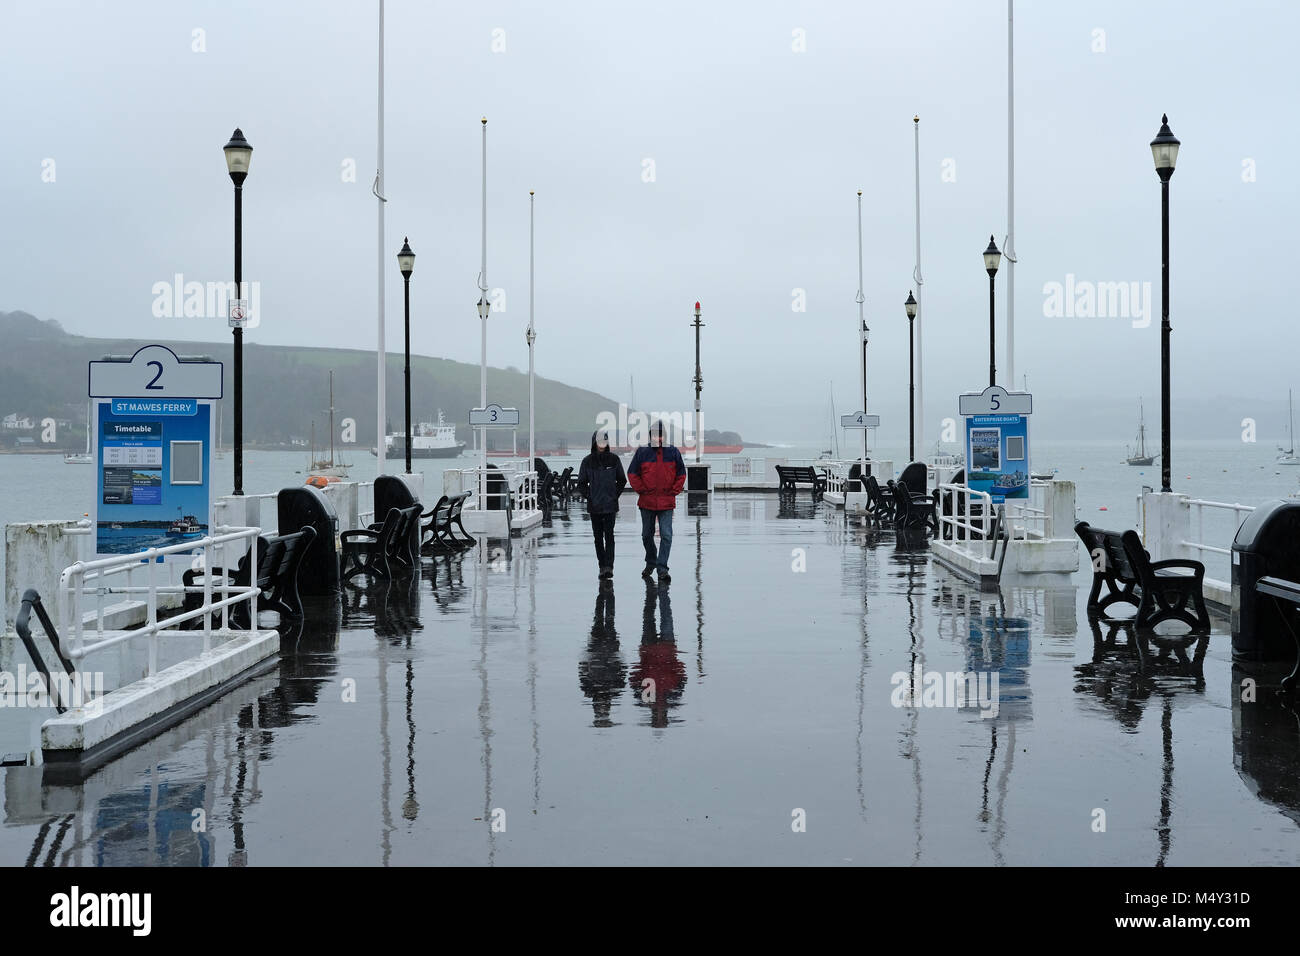 A rainy winters day in Falmouth, Cornwall Stock Photo